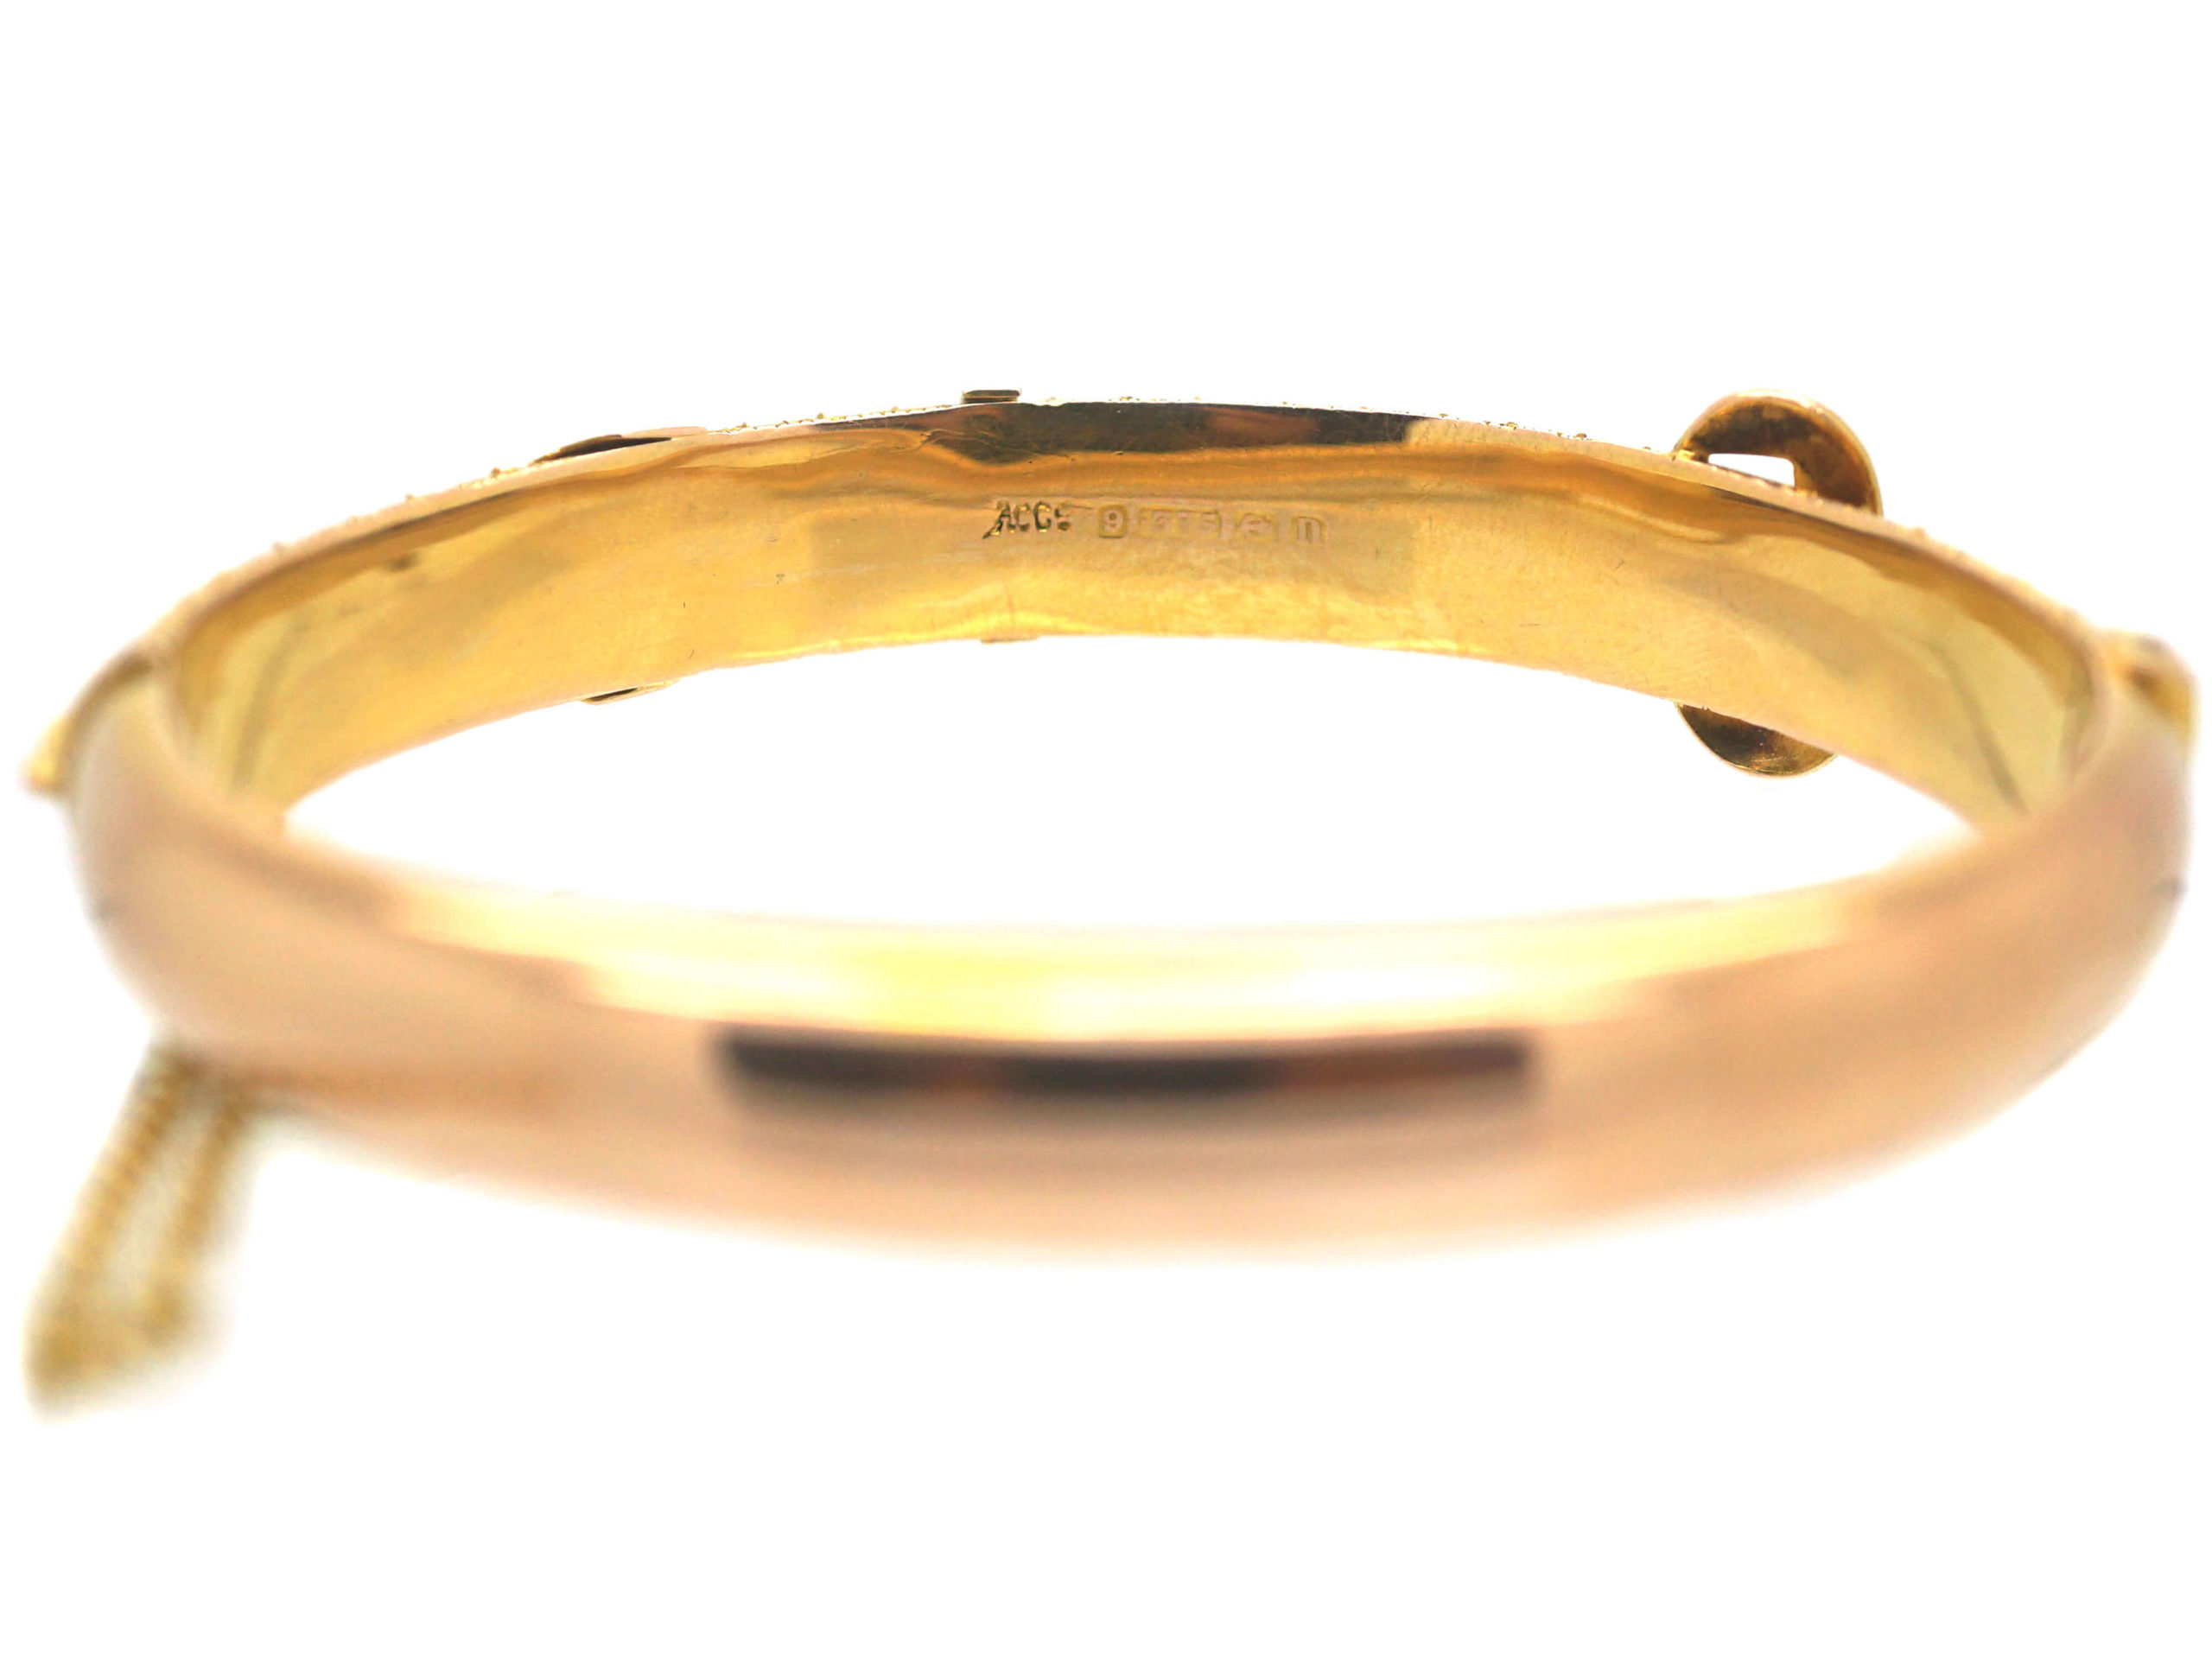 Edwardian 9ct Two Colour Gold Bangle with Buckle Motif (940P) | The ...